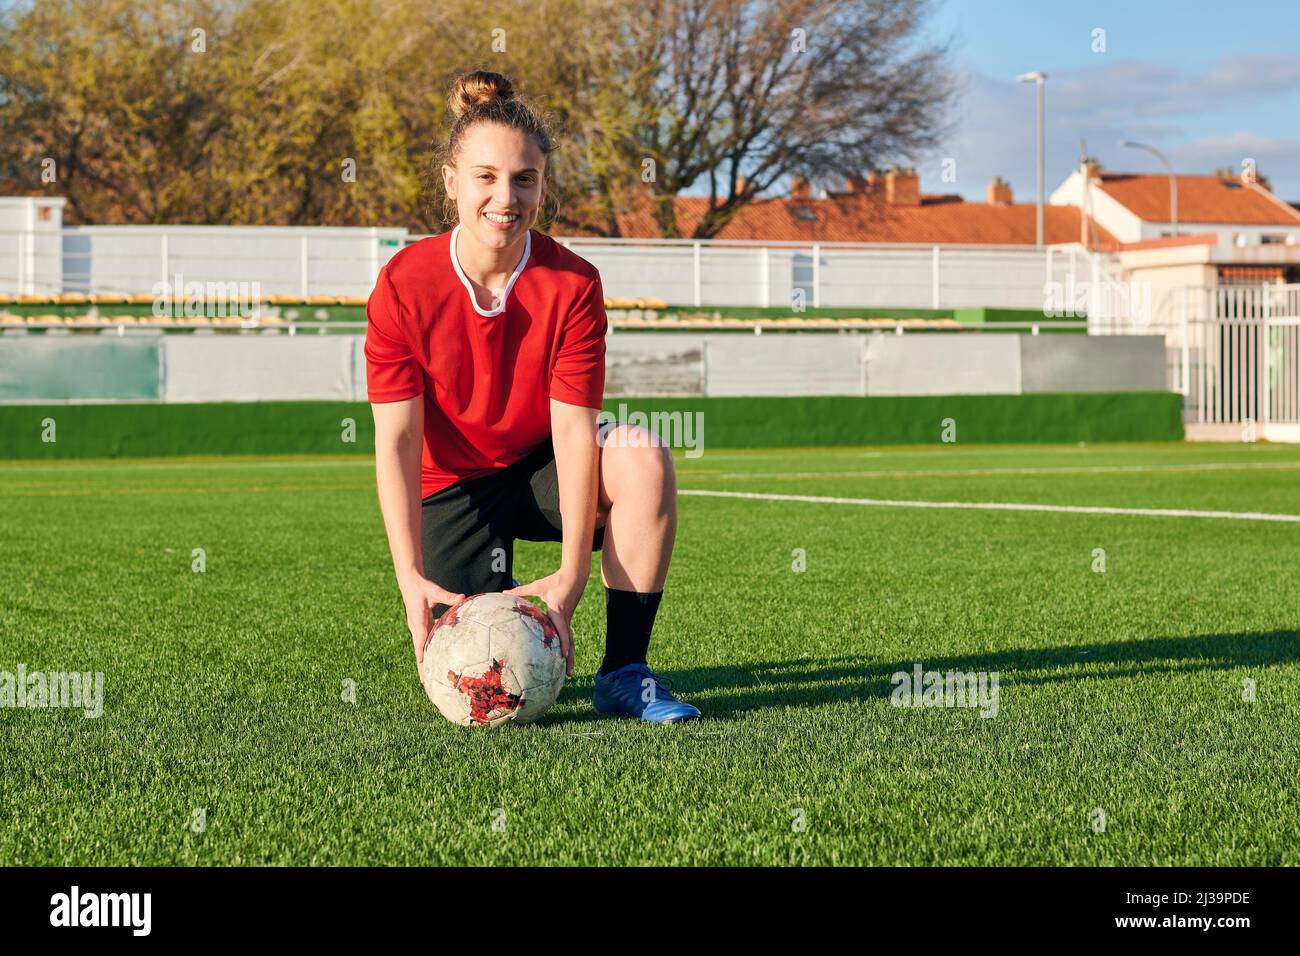 A female soccer player poses with a soccer ball looking at the camera